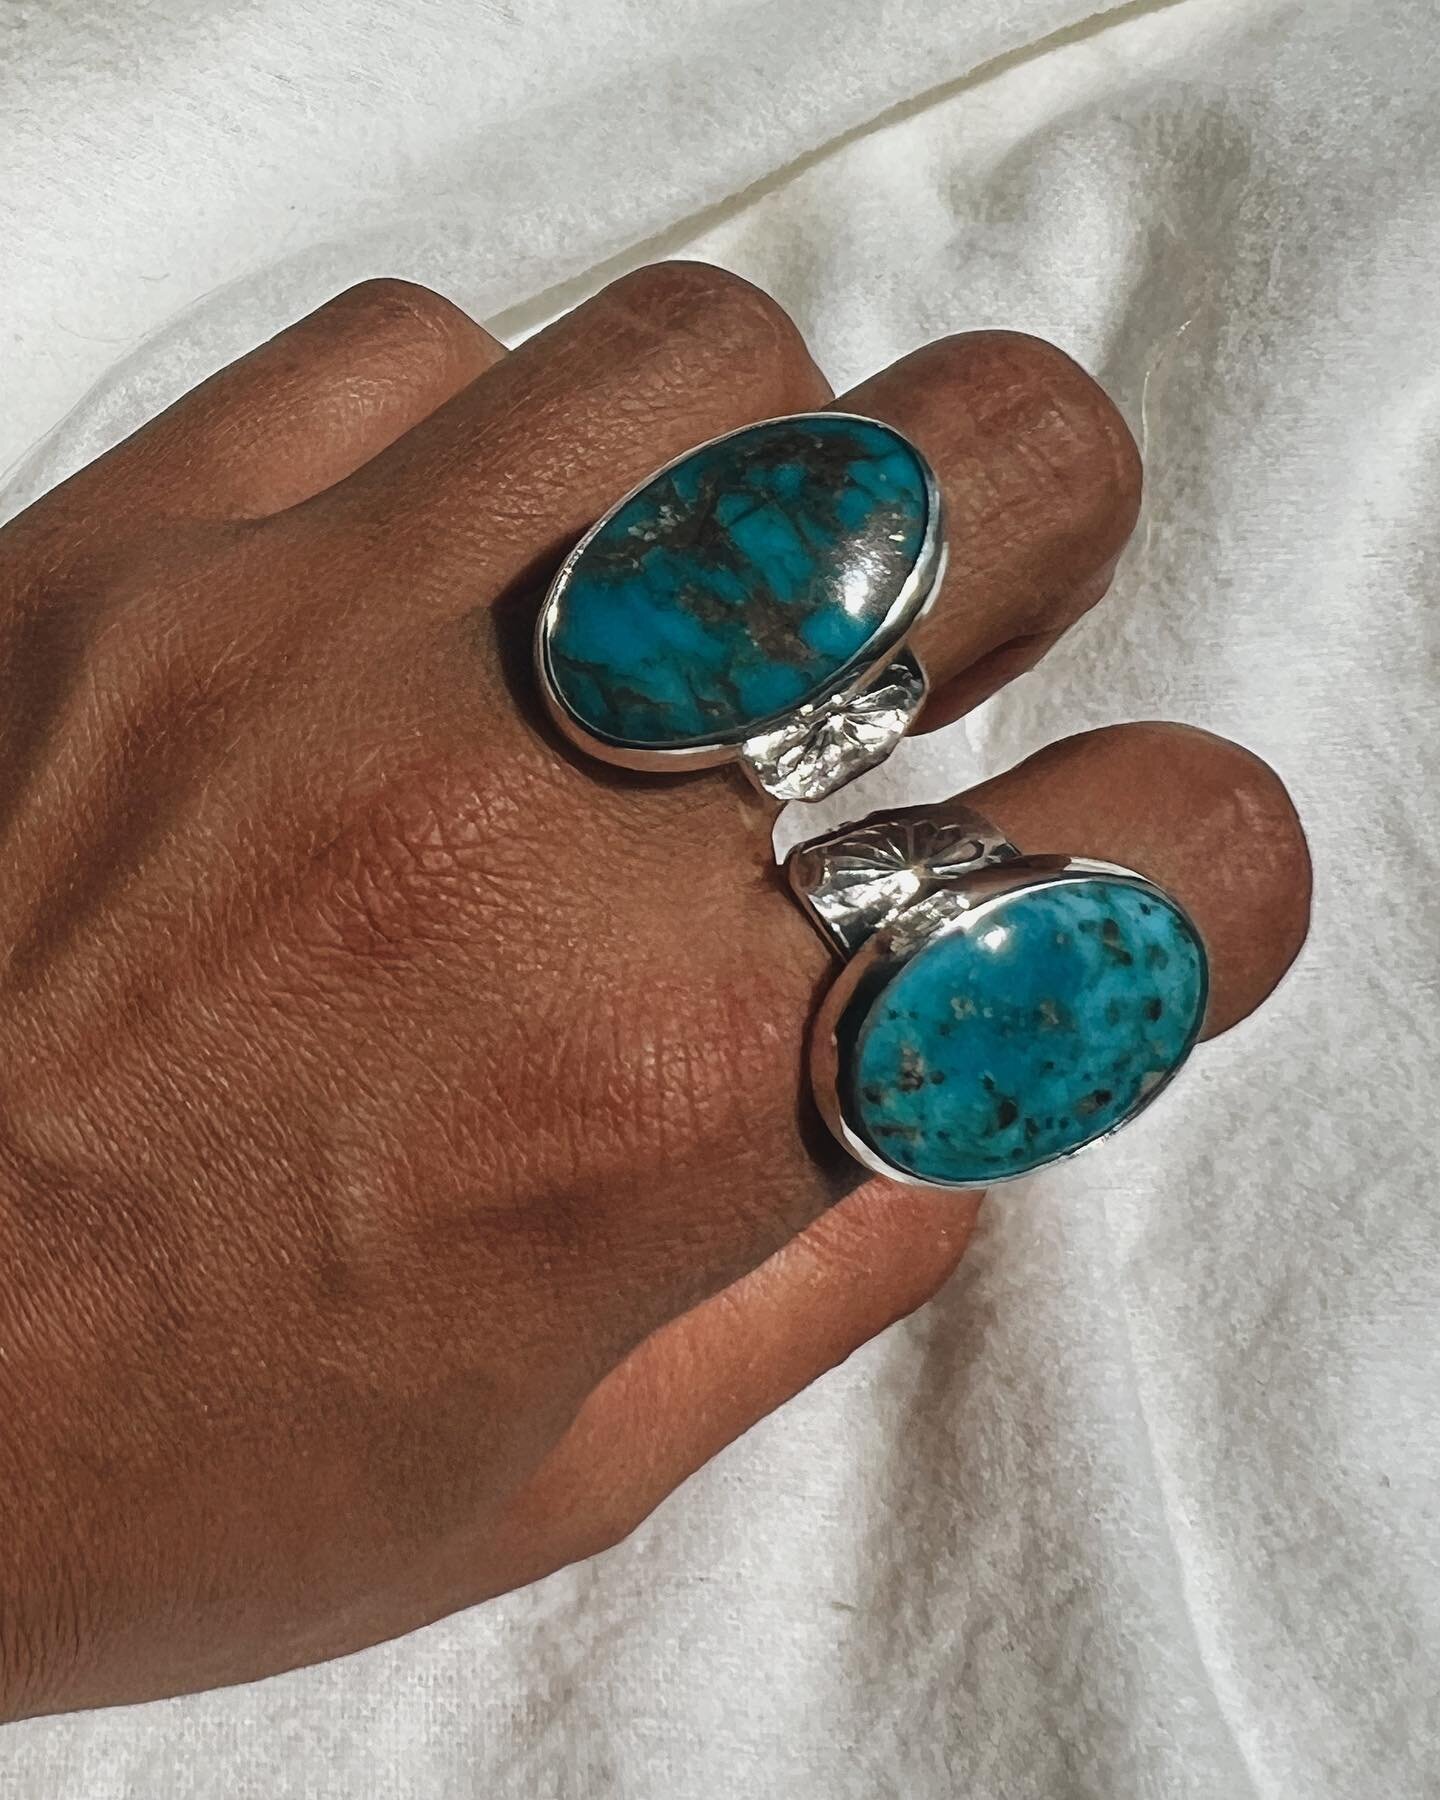 New side stamp Morenci turquoise ring.
Coming soon.
You can see these rings at the Labor Weekend market. Please come and visit us.

21st 
@witi city market and @coastalcollectivemarket 

22nd
@thelittlebigmarkets  in Whangamata

23rd
@stheliersartcra